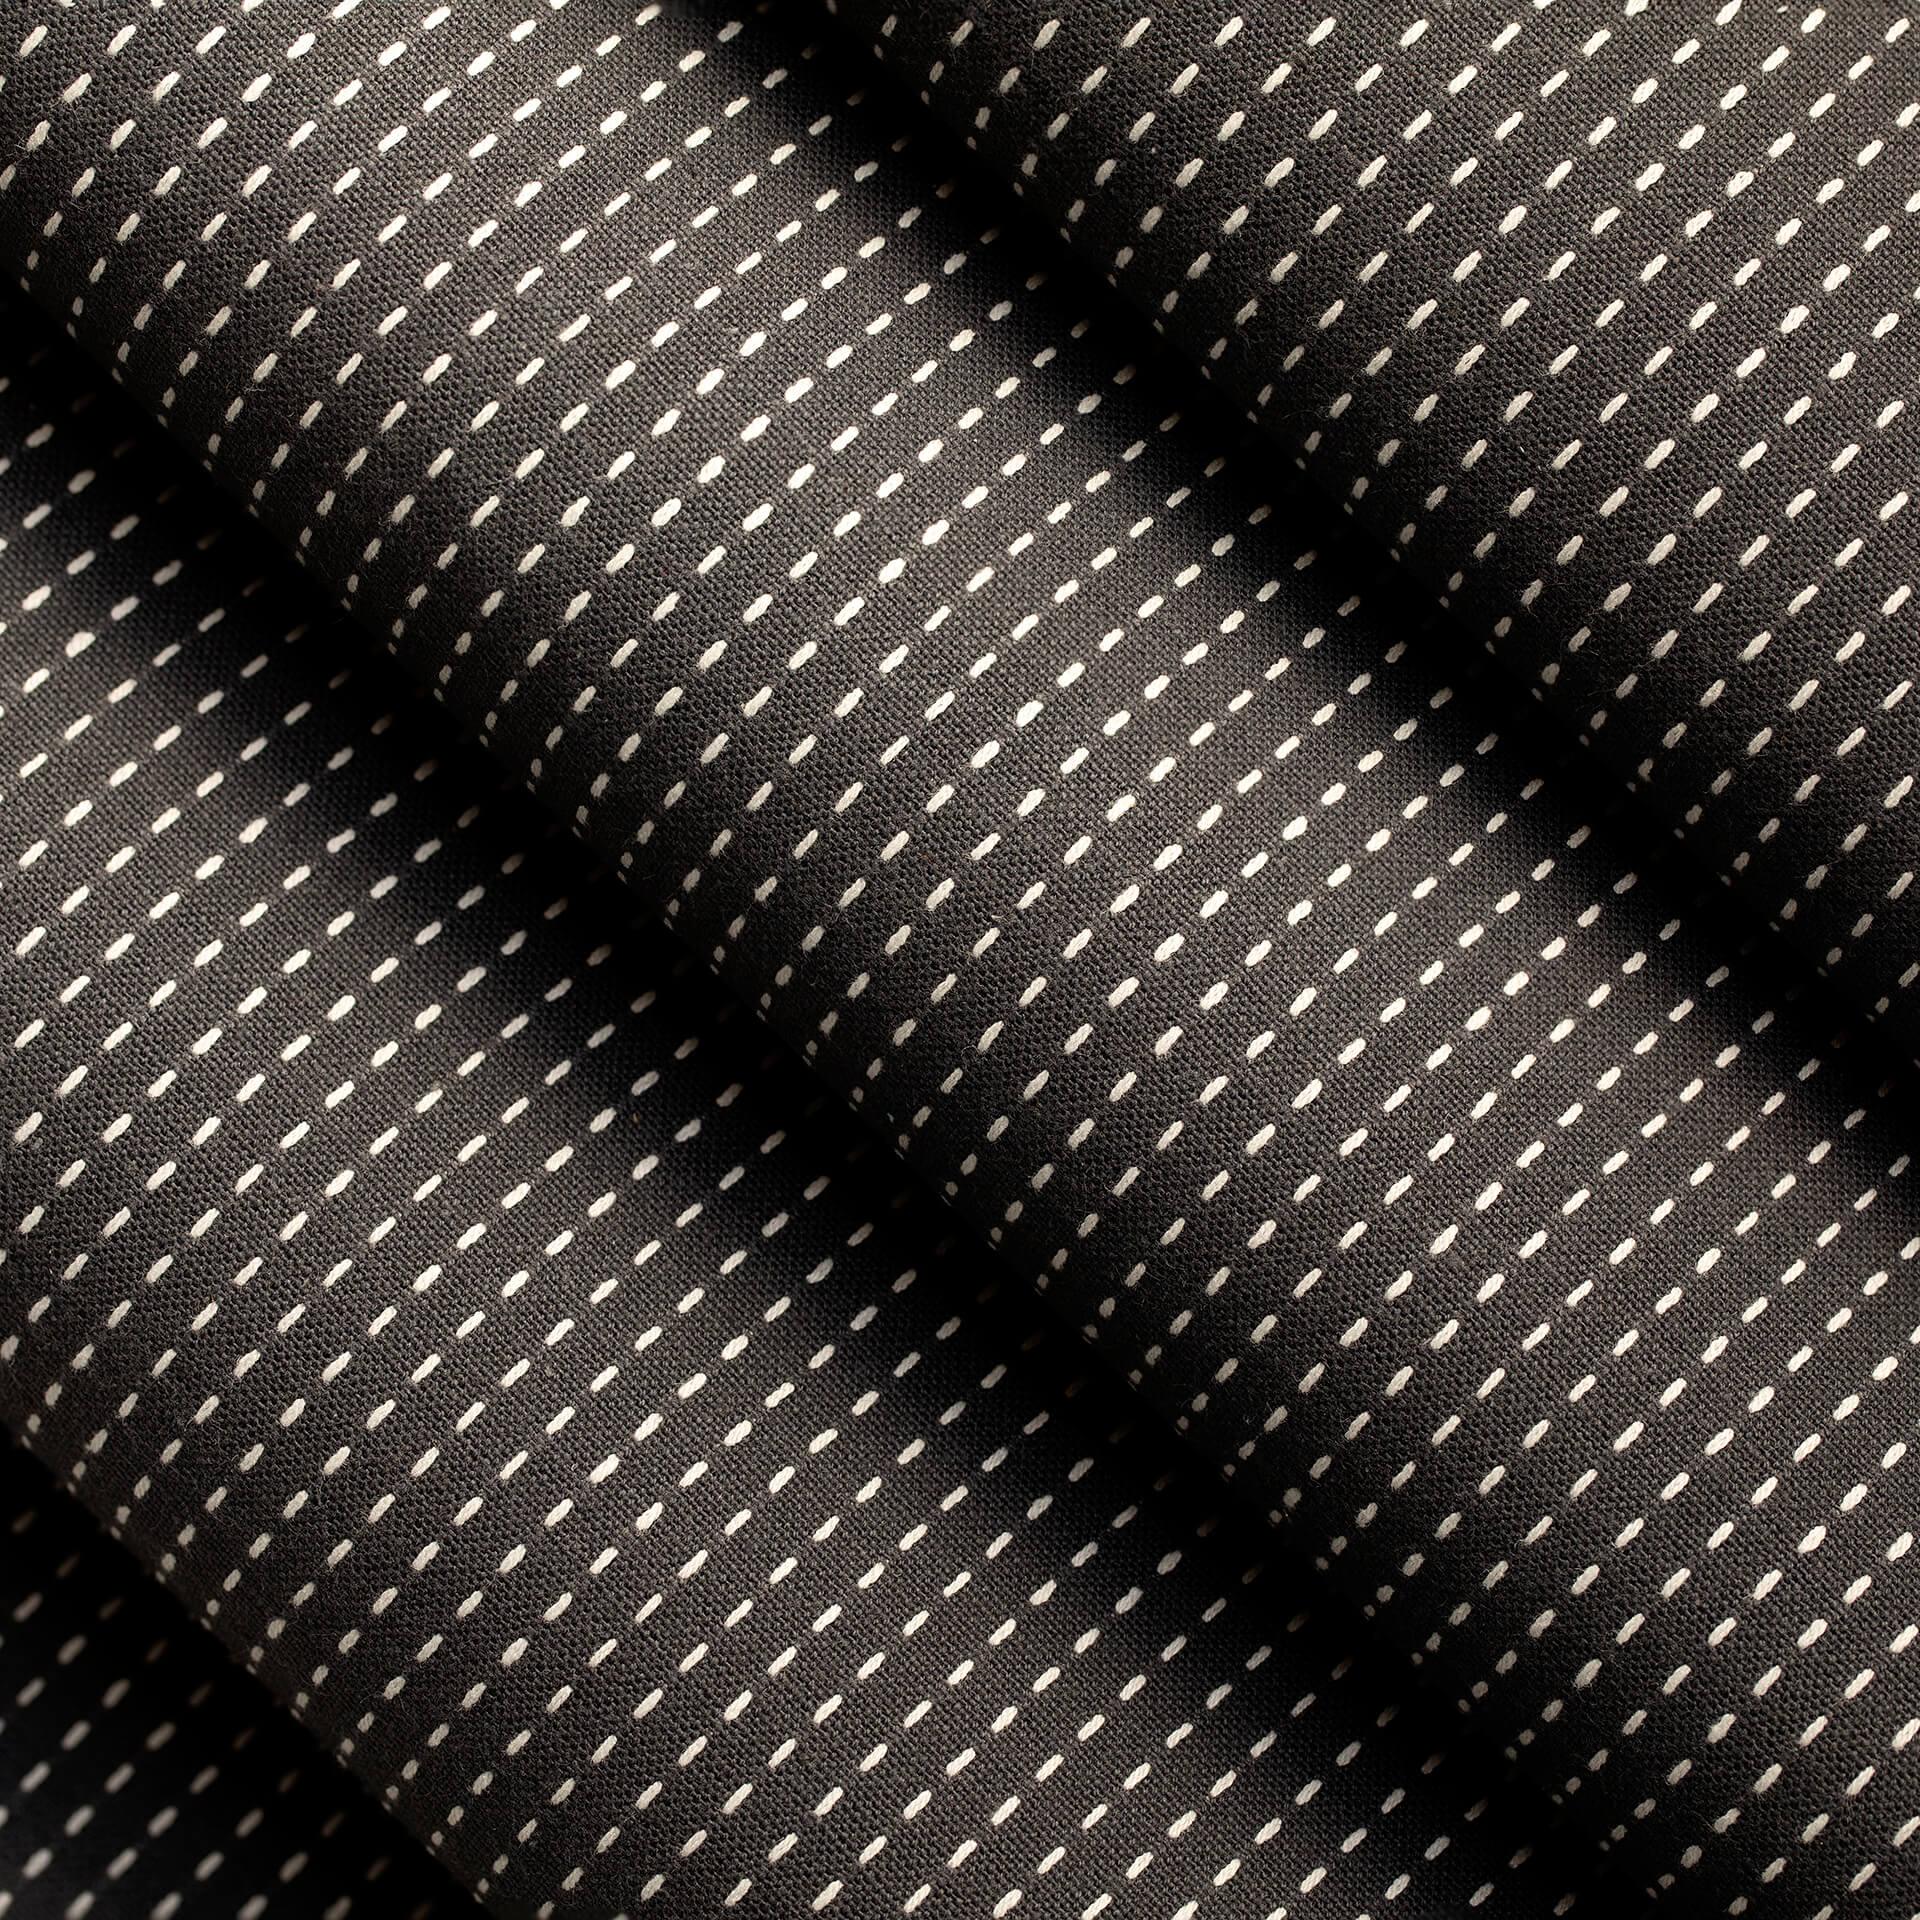 Pinstriped 100% Cotton Table Runner (Charcoal Grey)